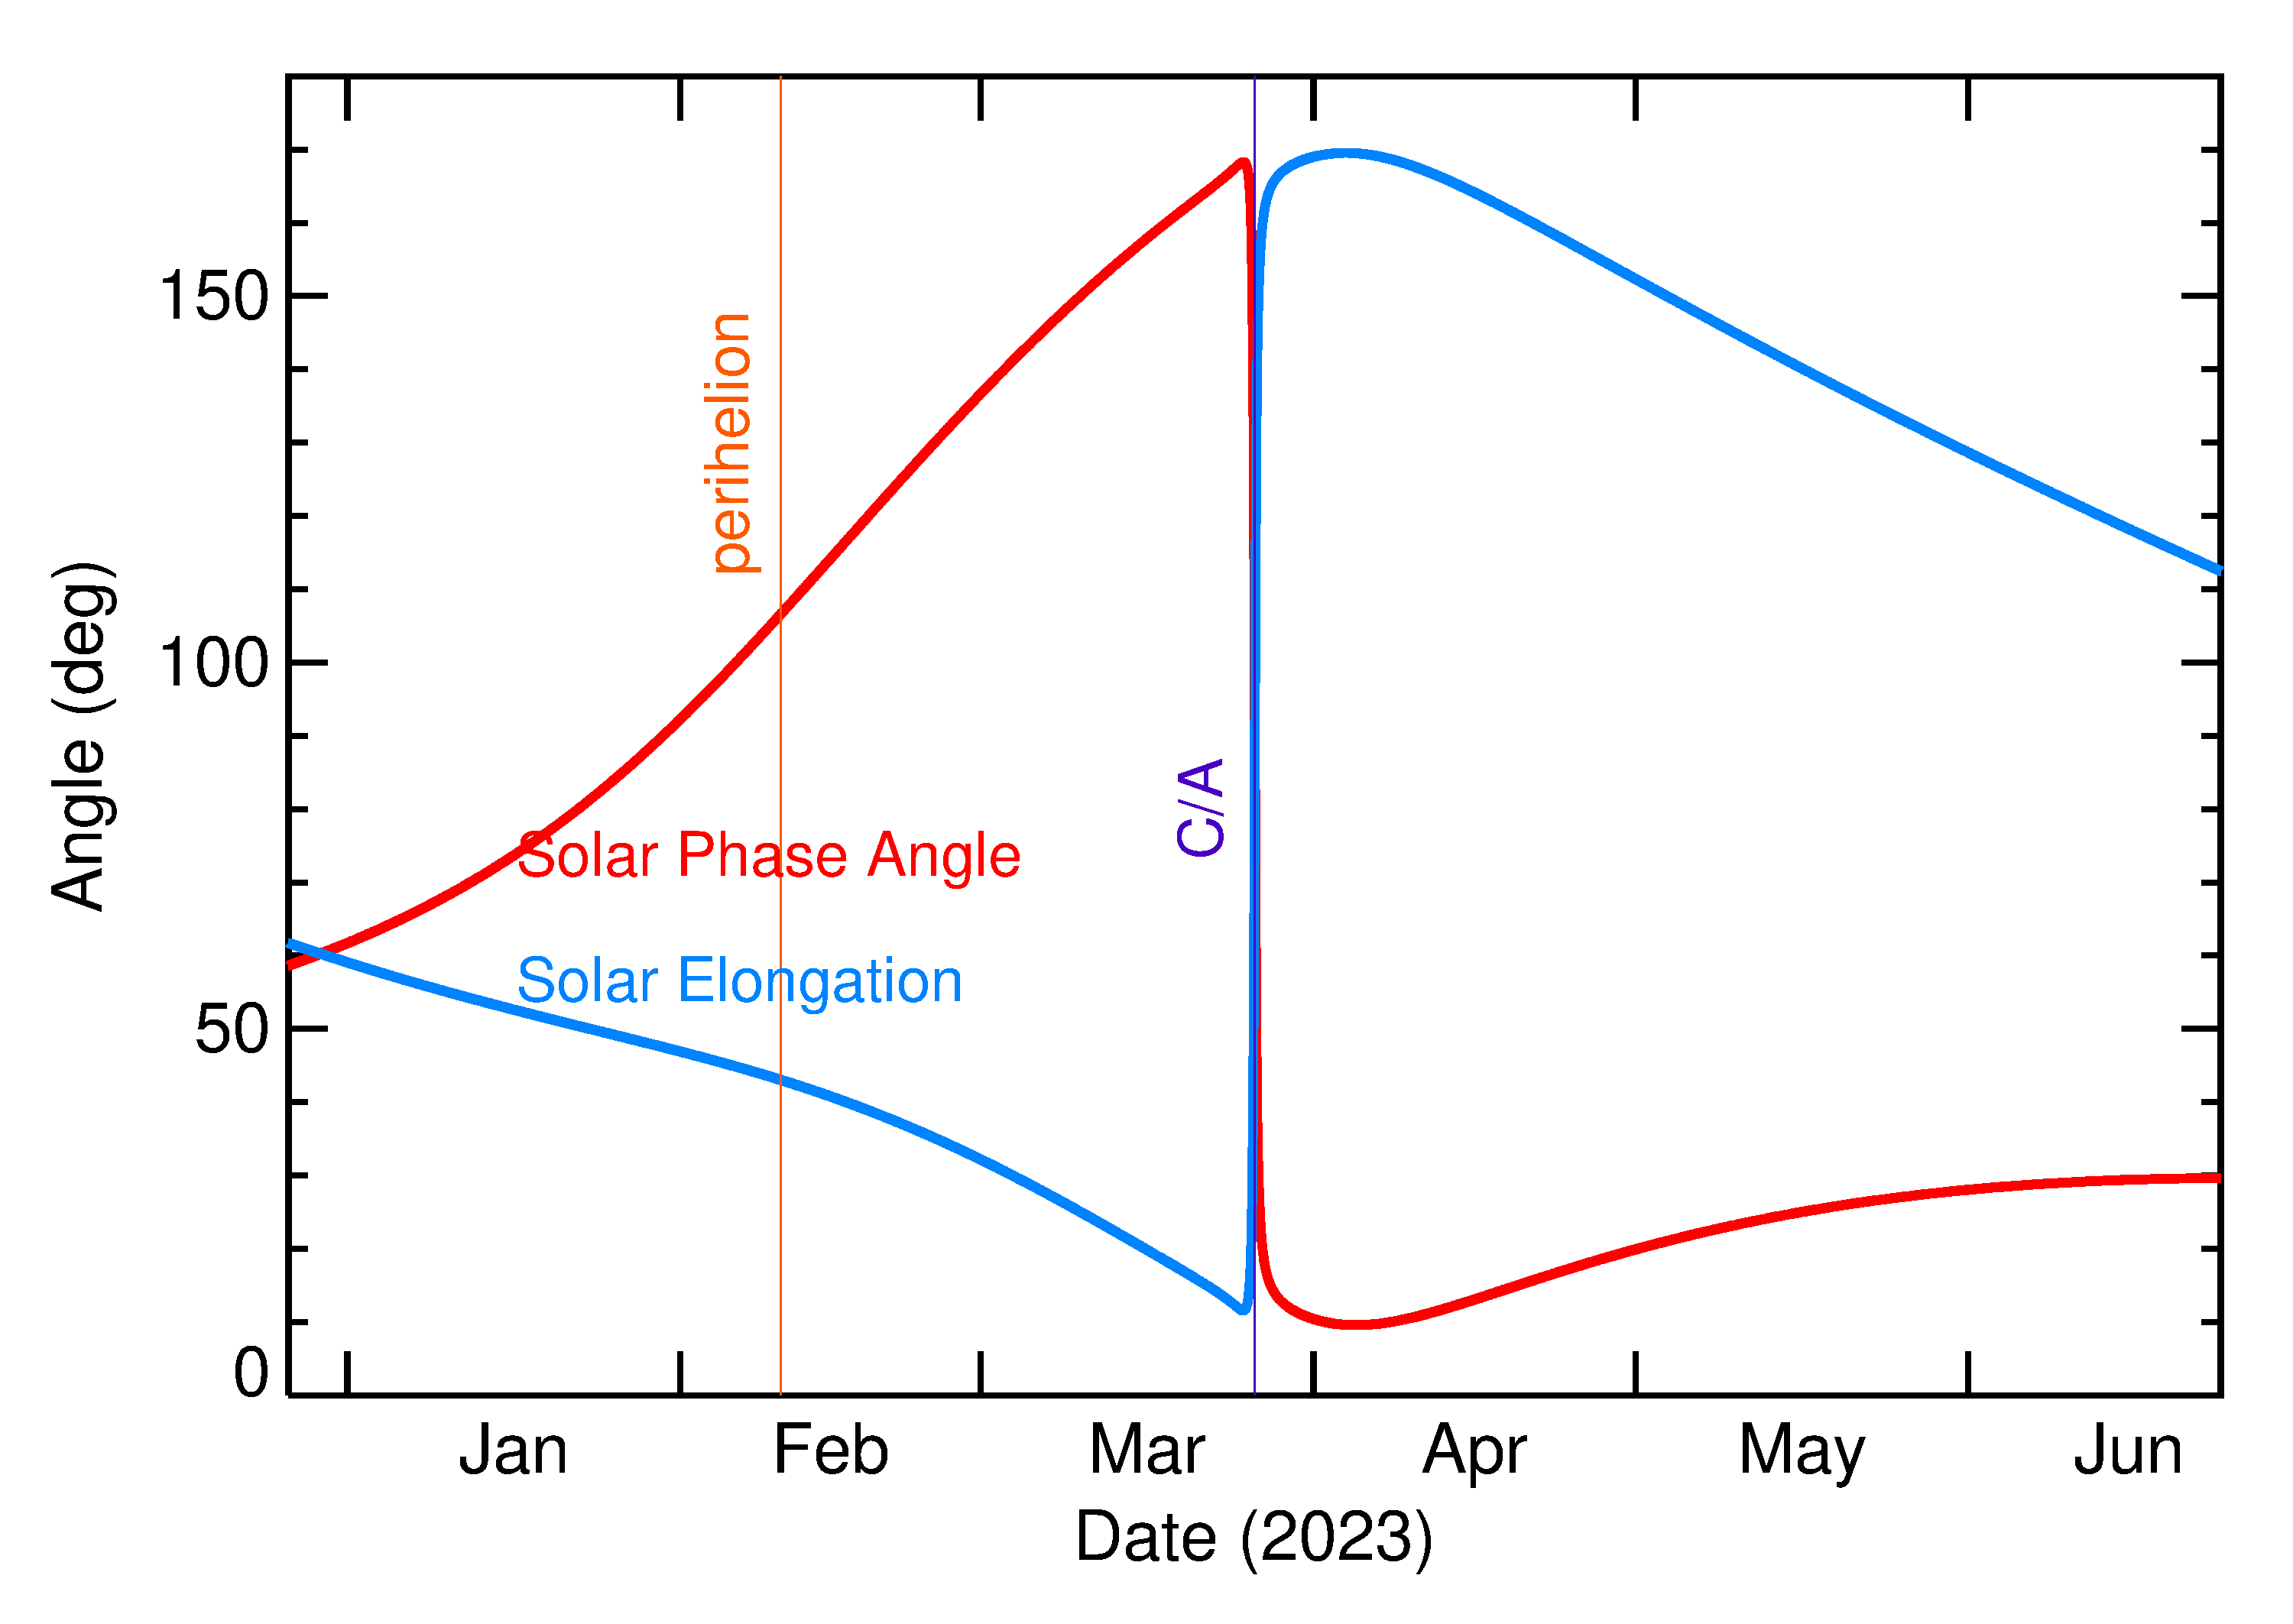 Solar Elongation and Solar Phase Angle of 2023 FN6 in the months around closest approach